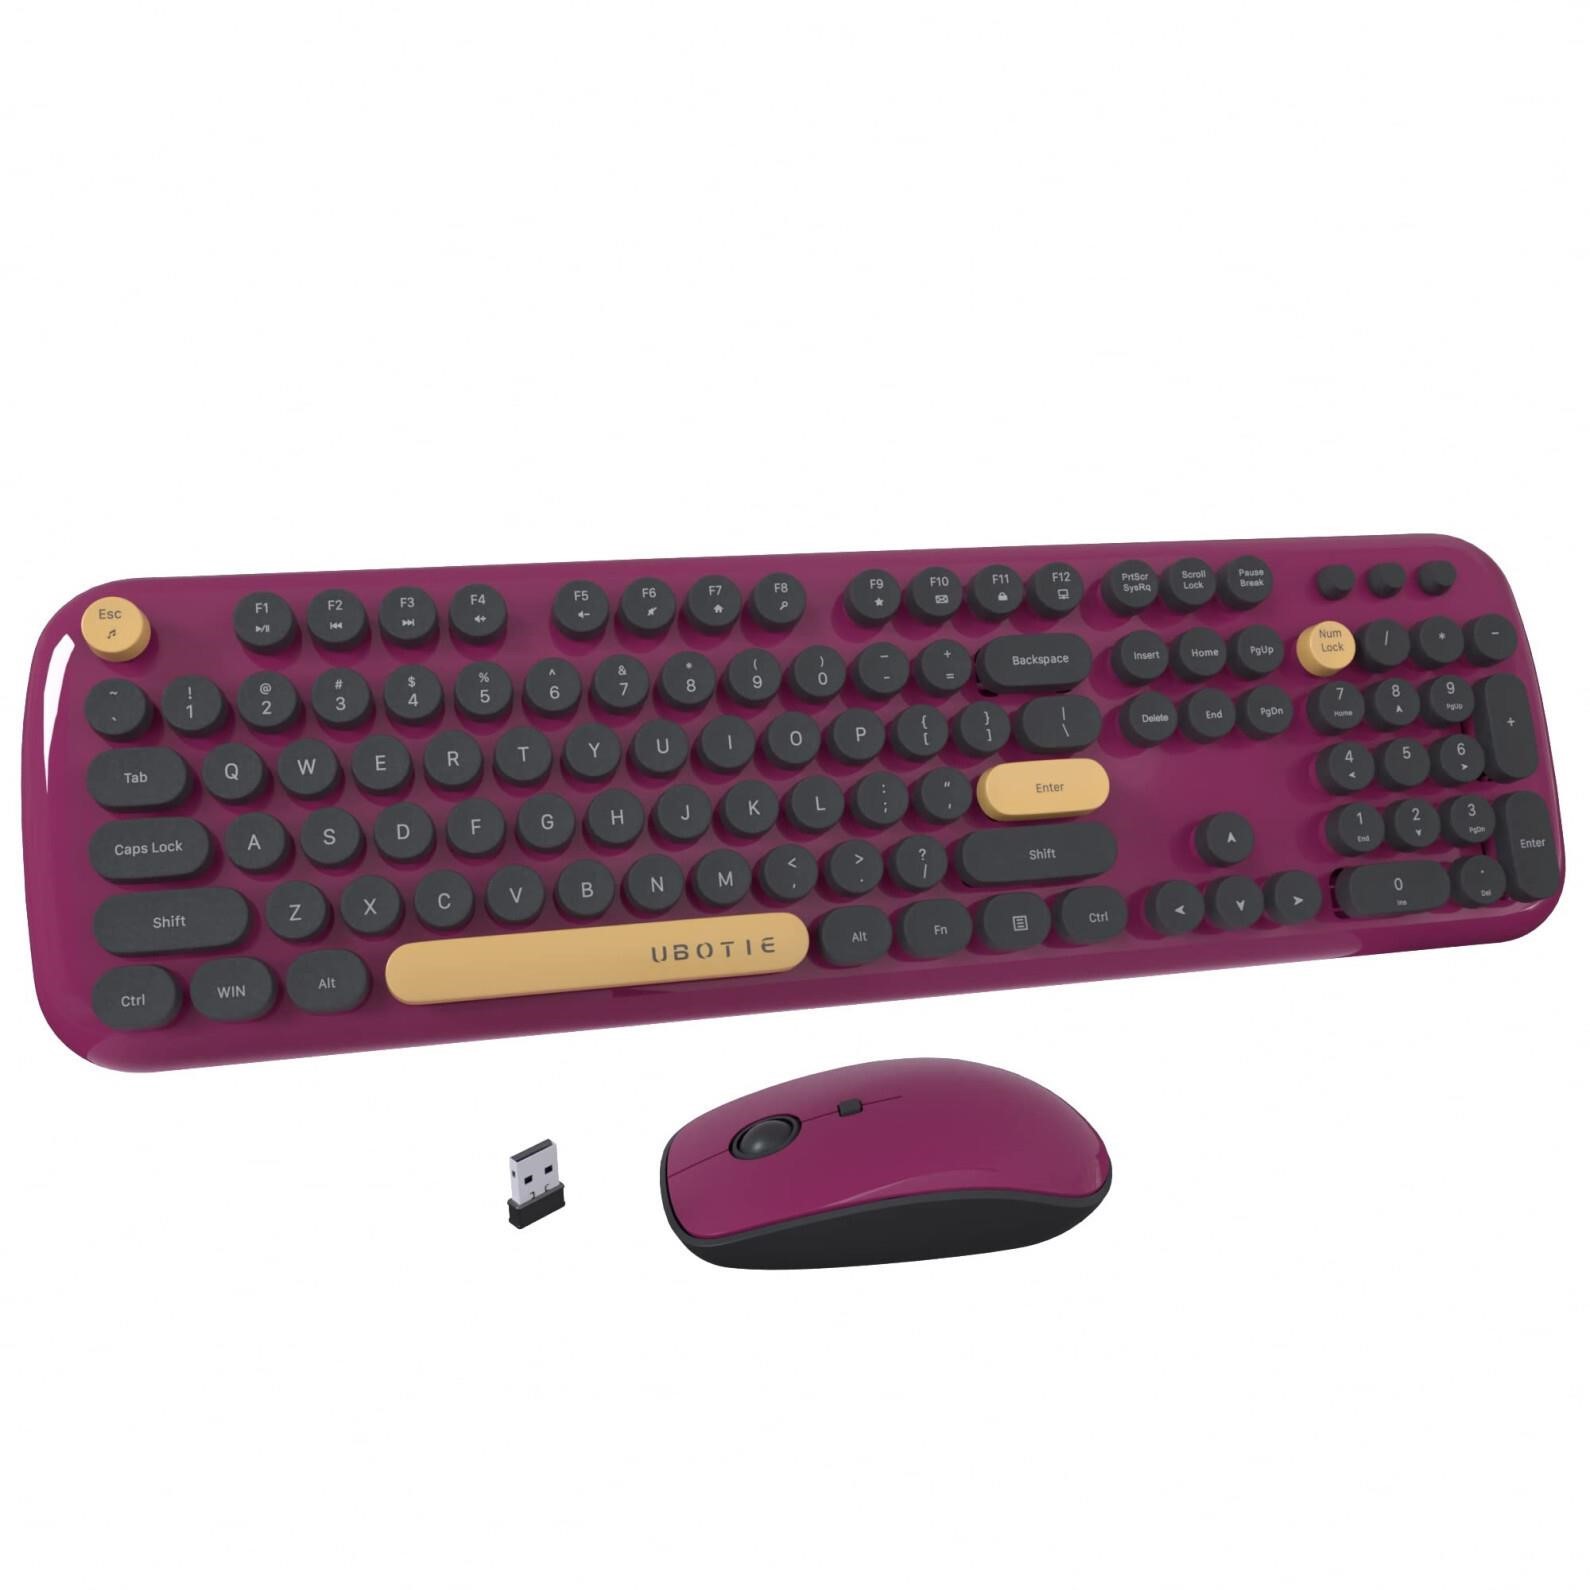 Colorful Wireless Computer Keyboards Mouse Combos